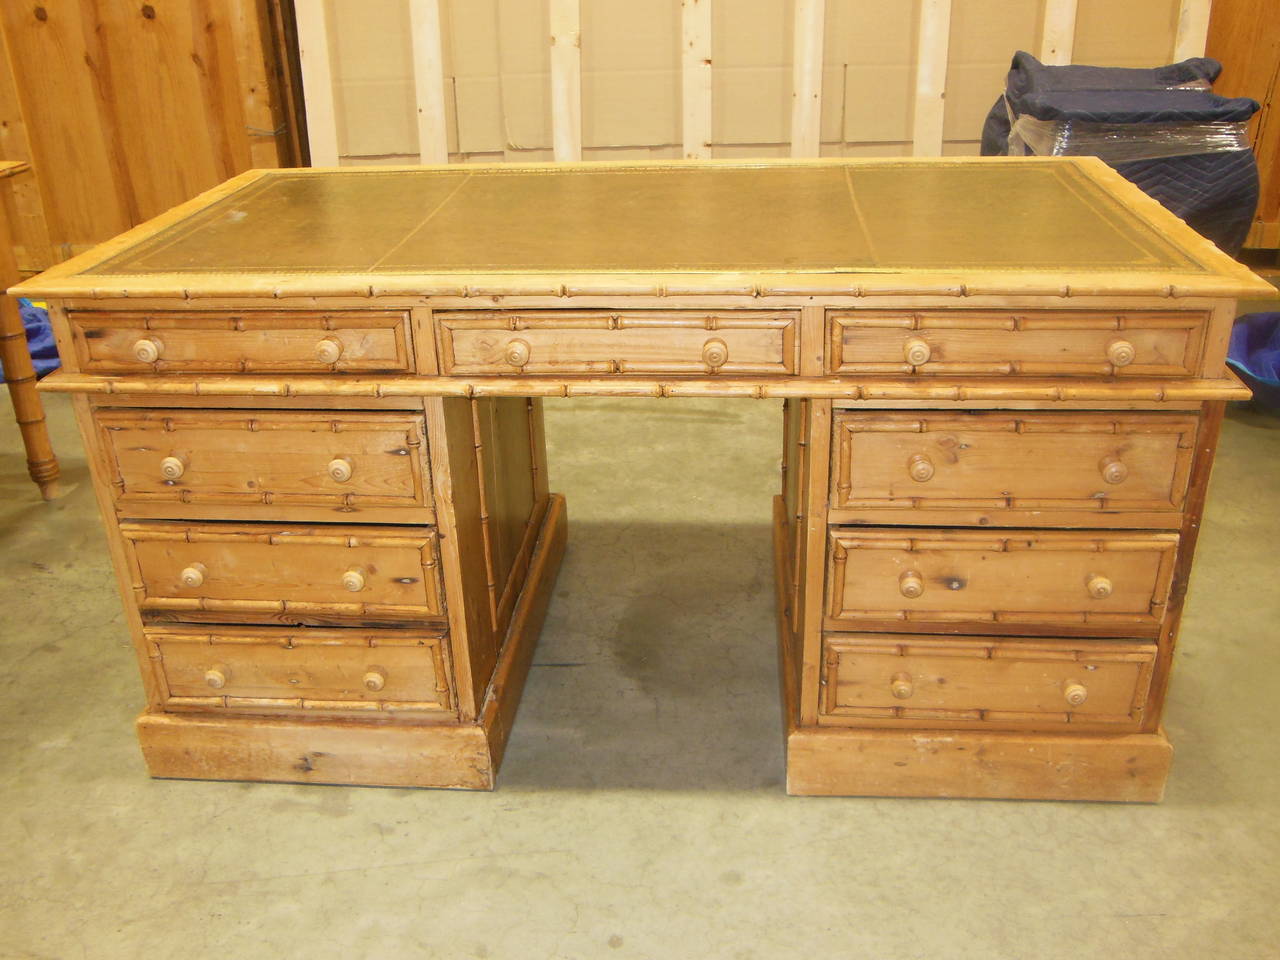 Very handsome faux bamboo desk finished on both sides with a scrolled leather top and brass trim.